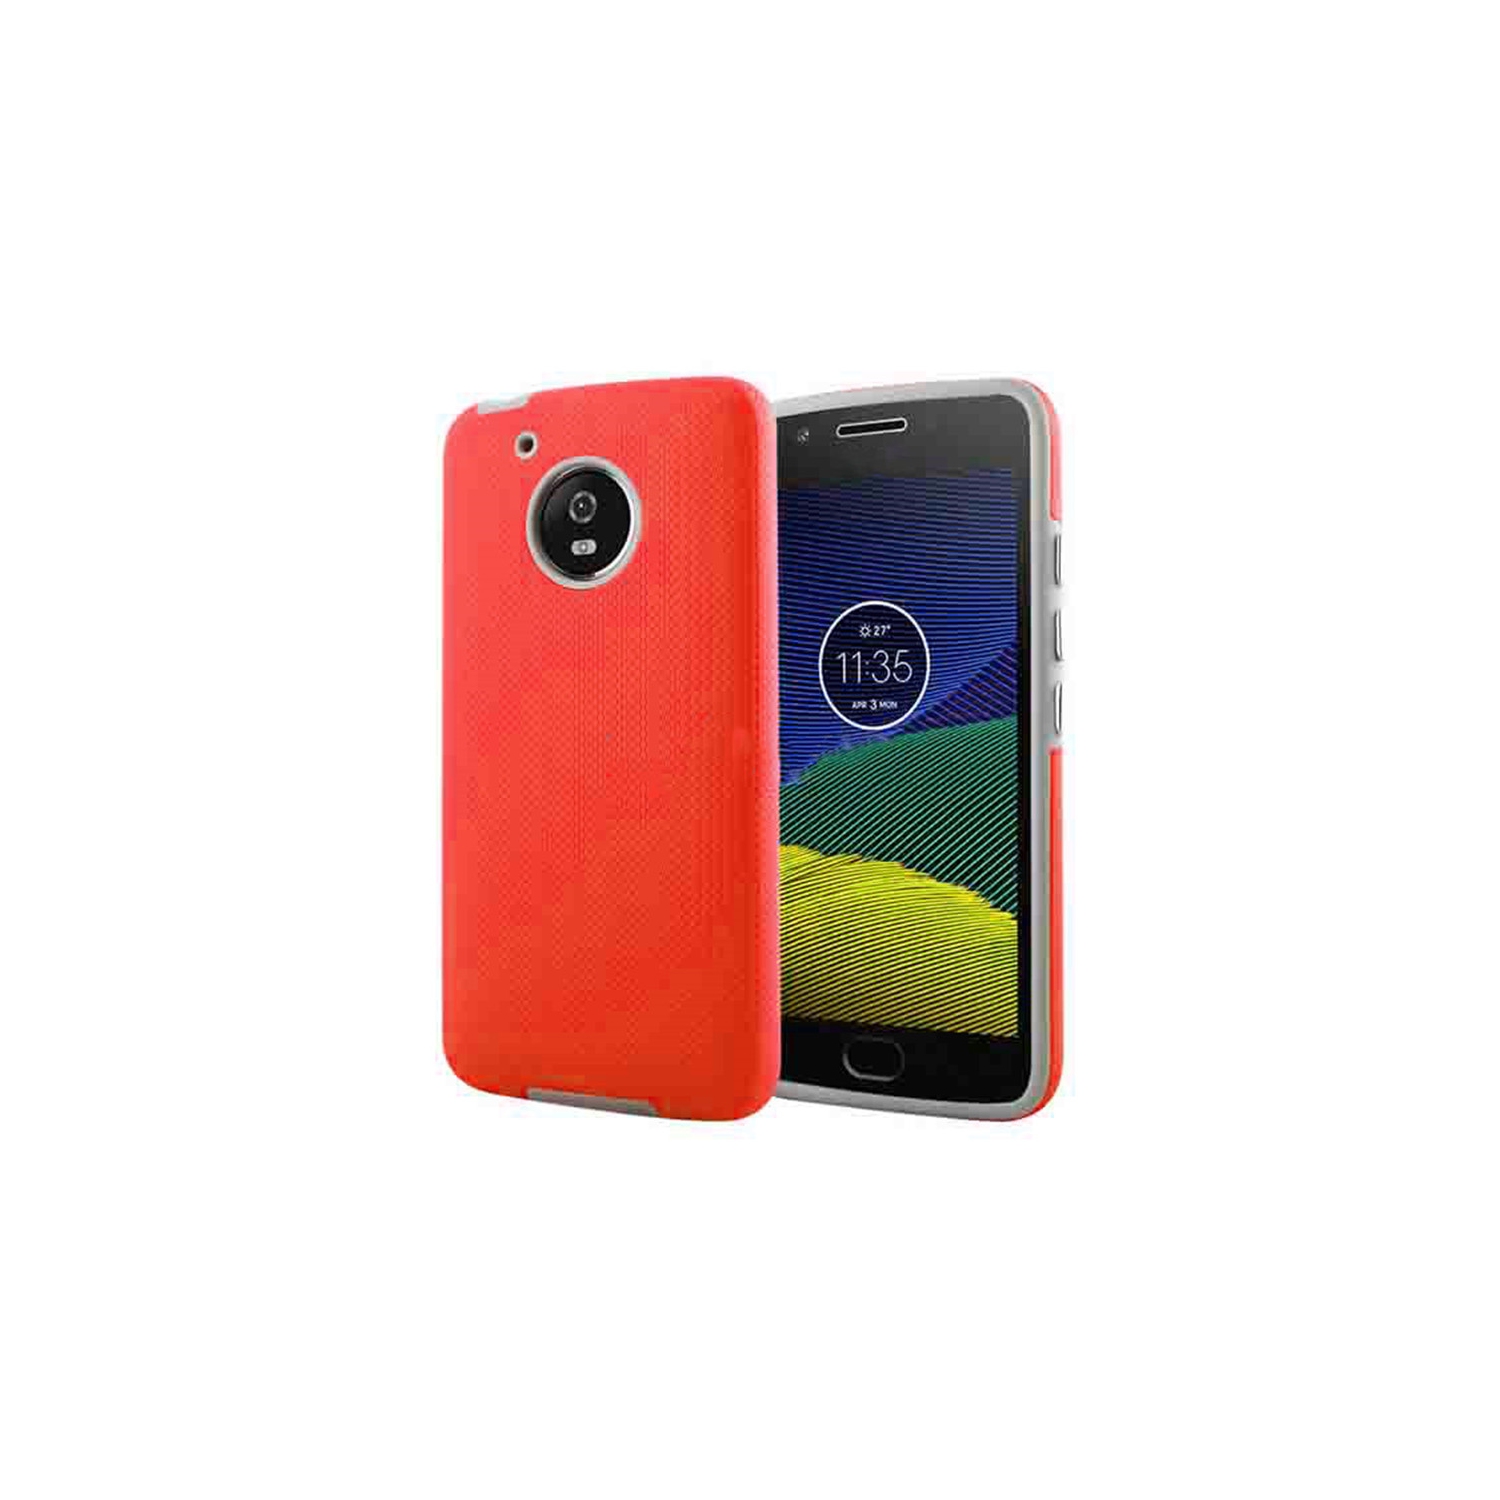 【CSmart】 Slim Fitted Hybrid Hard PC Shell Shockproof Scratch Resistant Case Cover for Motorola Moto Z3 Play, Red